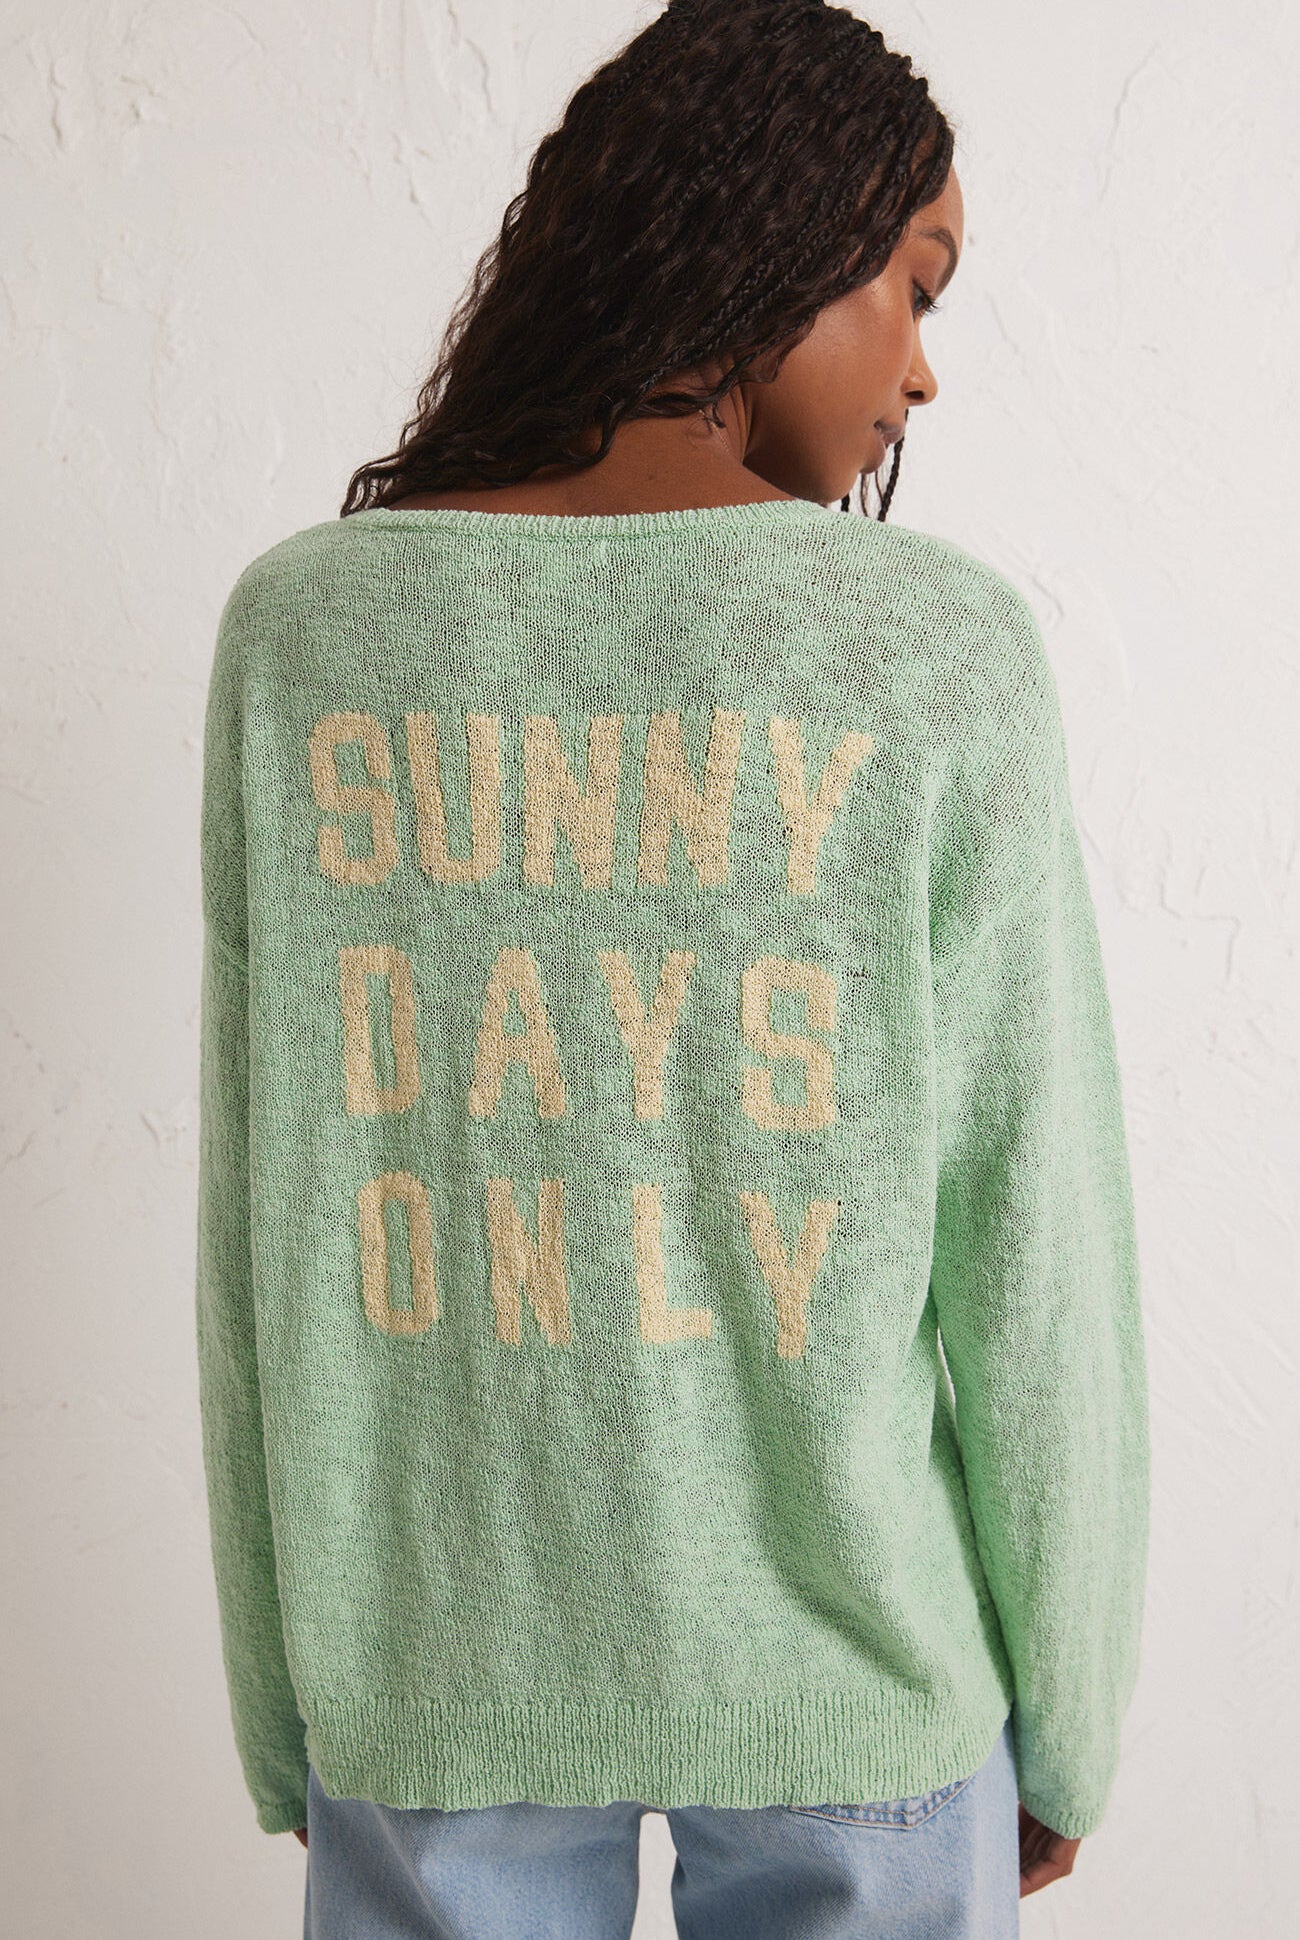 Sunny Days Only Sweater-Sweaters-Vixen Collection, Day Spa and Women's Boutique Located in Seattle, Washington